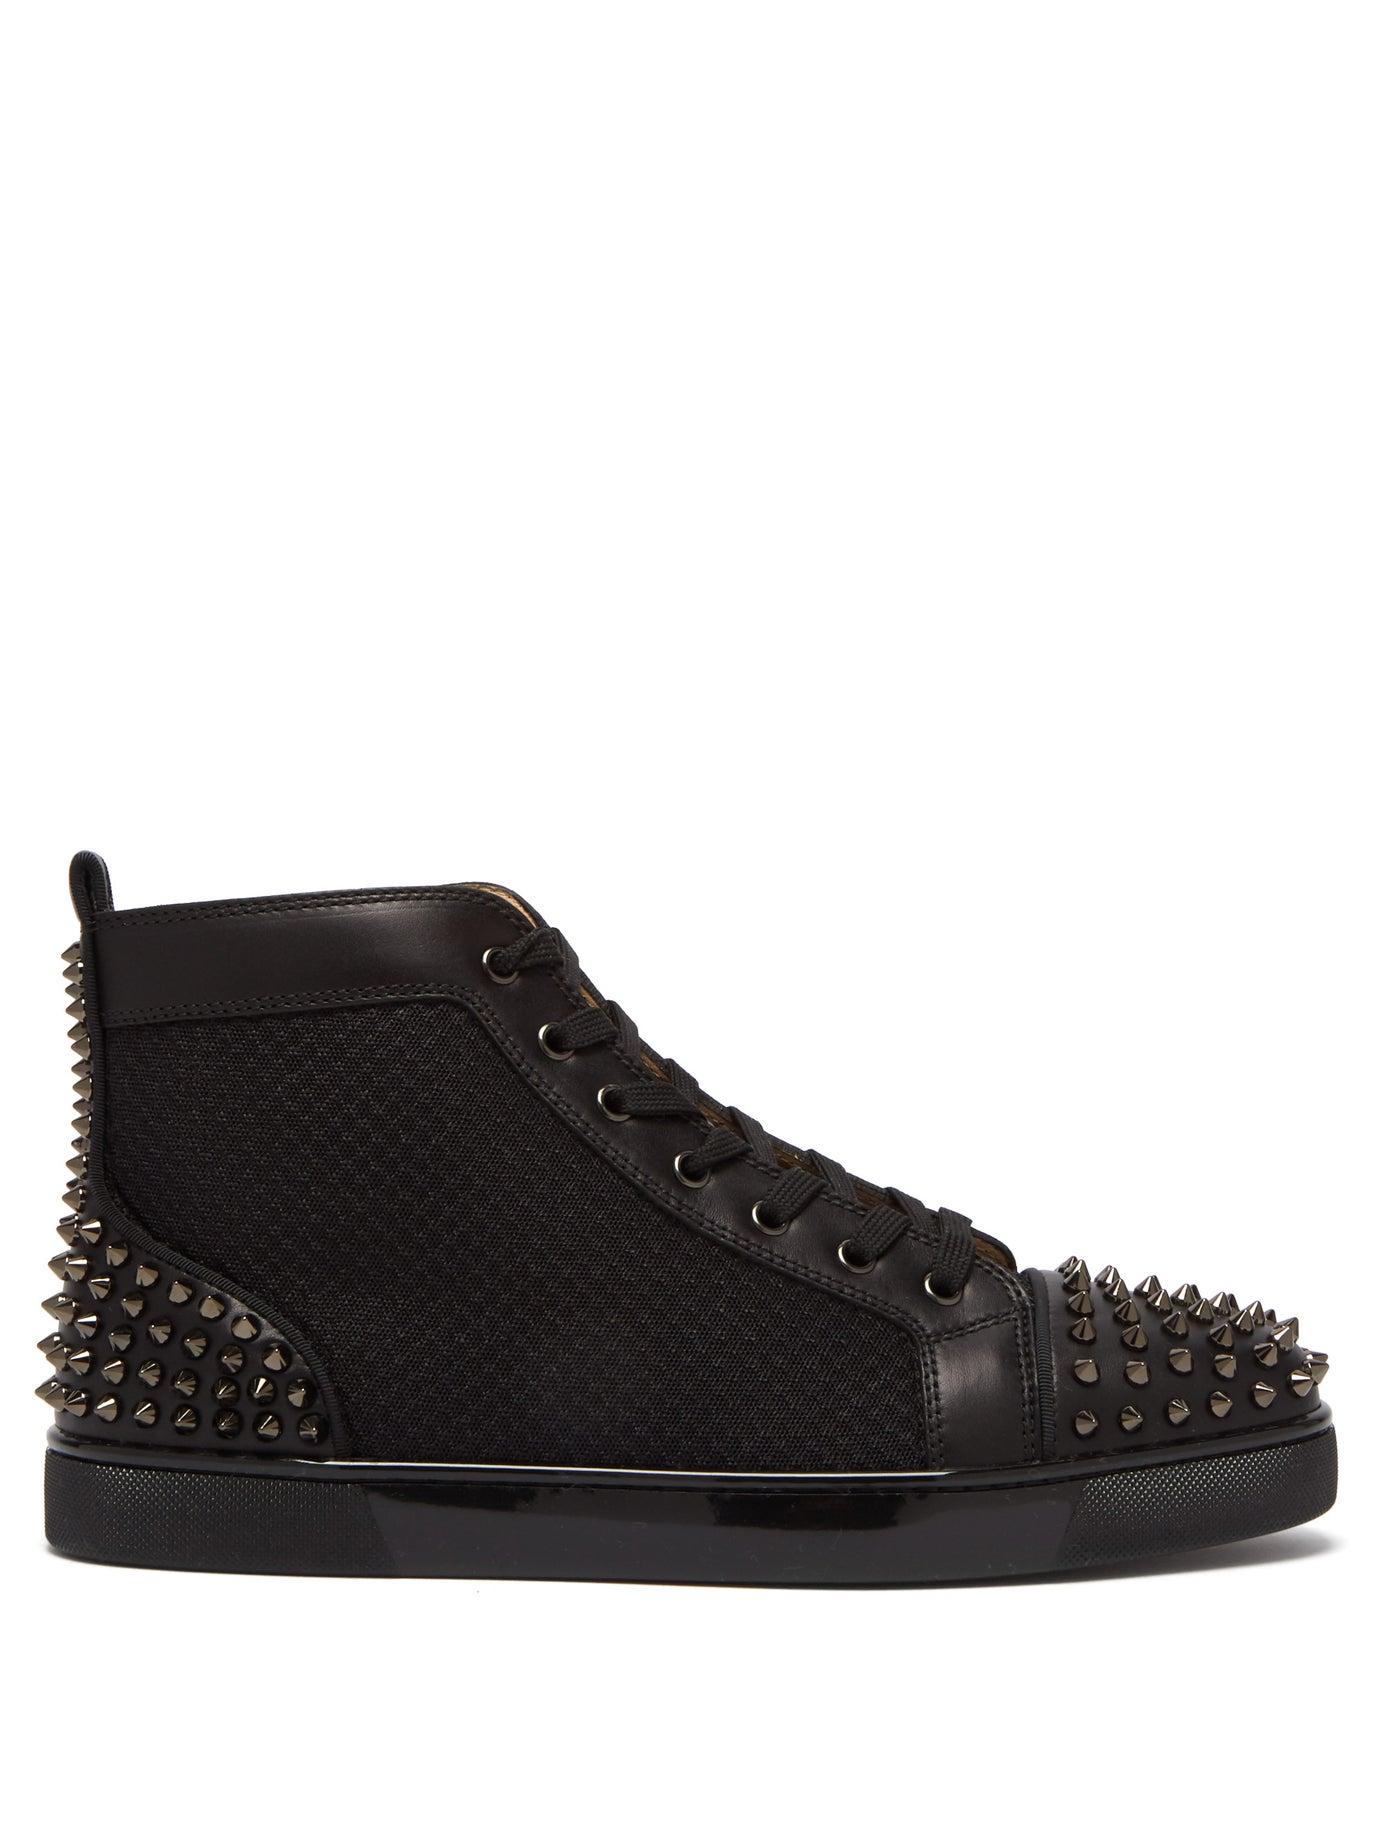 Christian Louboutin Lou Spike Embellished Leather High Top Trainers in ...